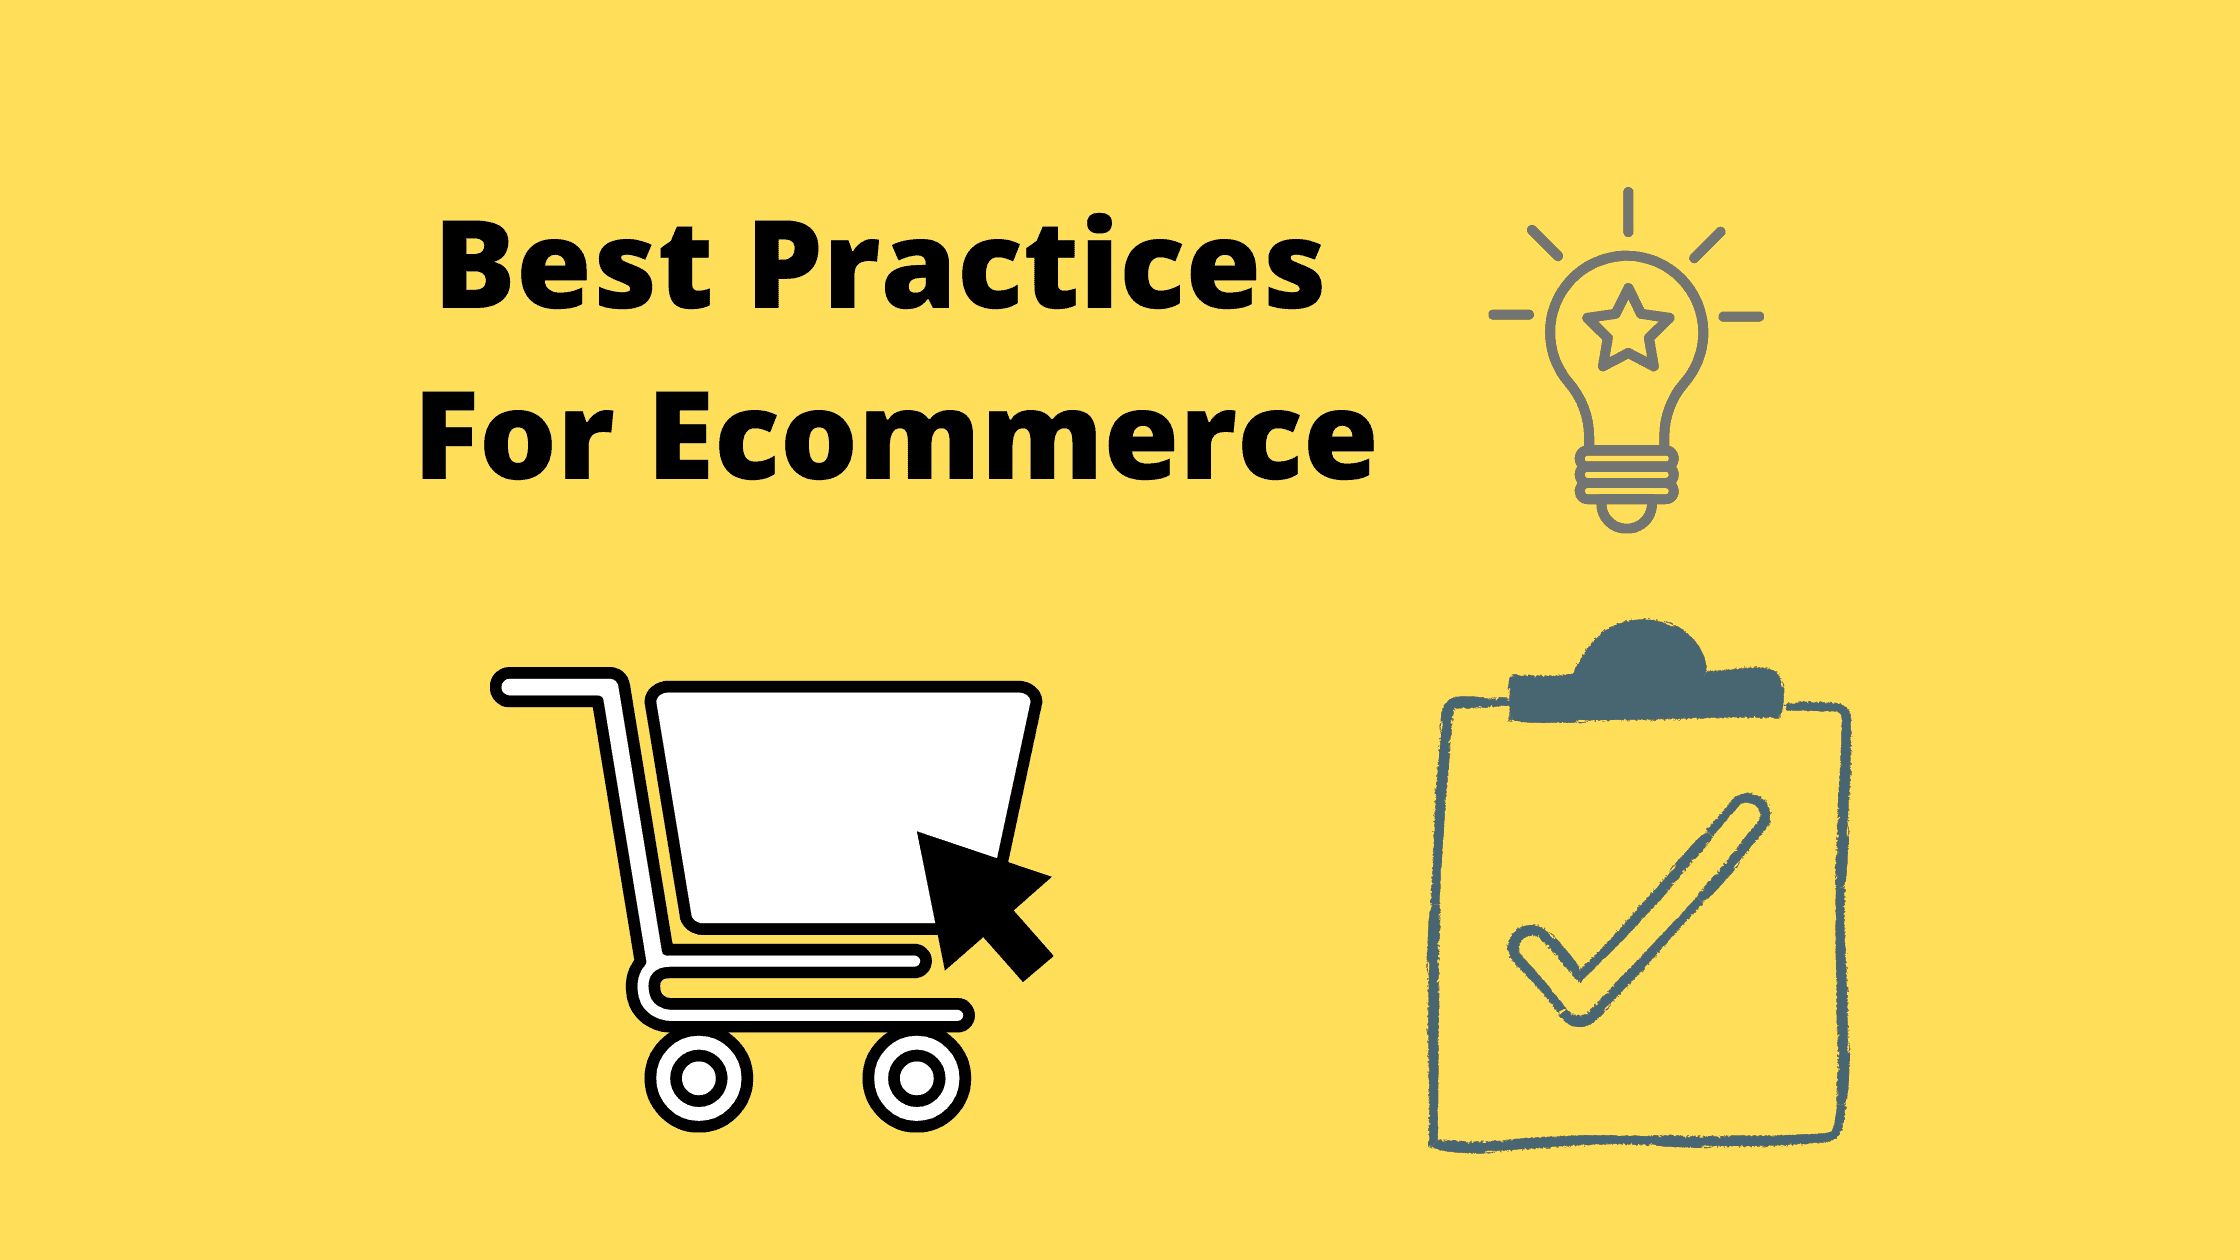 Best Practices For Ecommerce